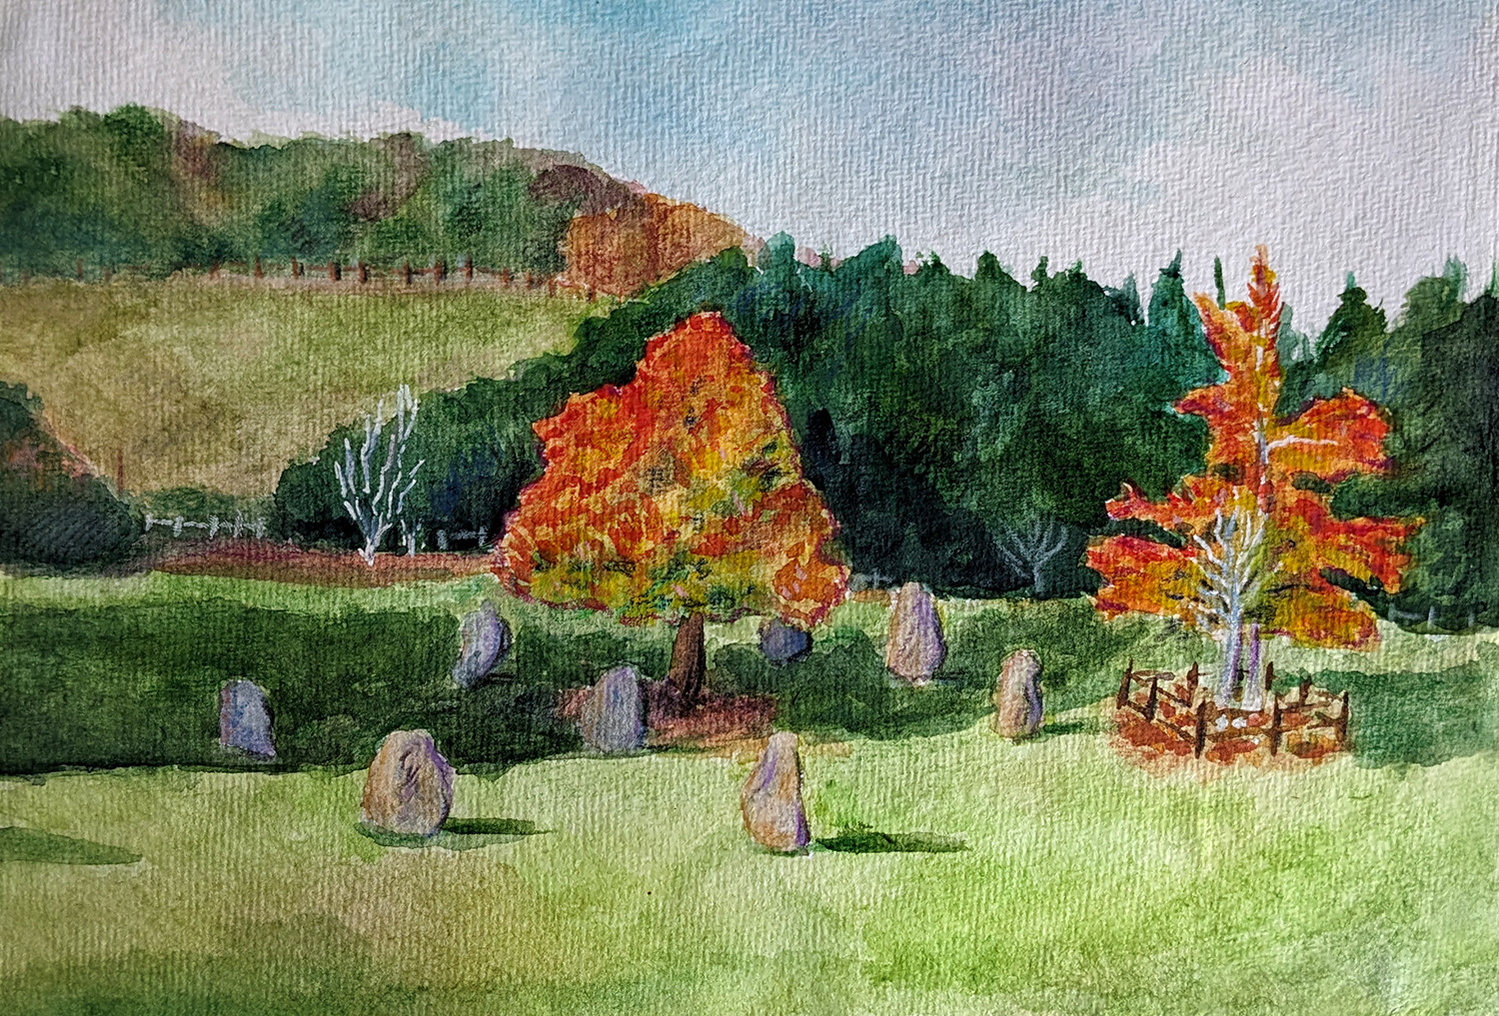 Painting of a field with standing stones and two trees with orange leaves